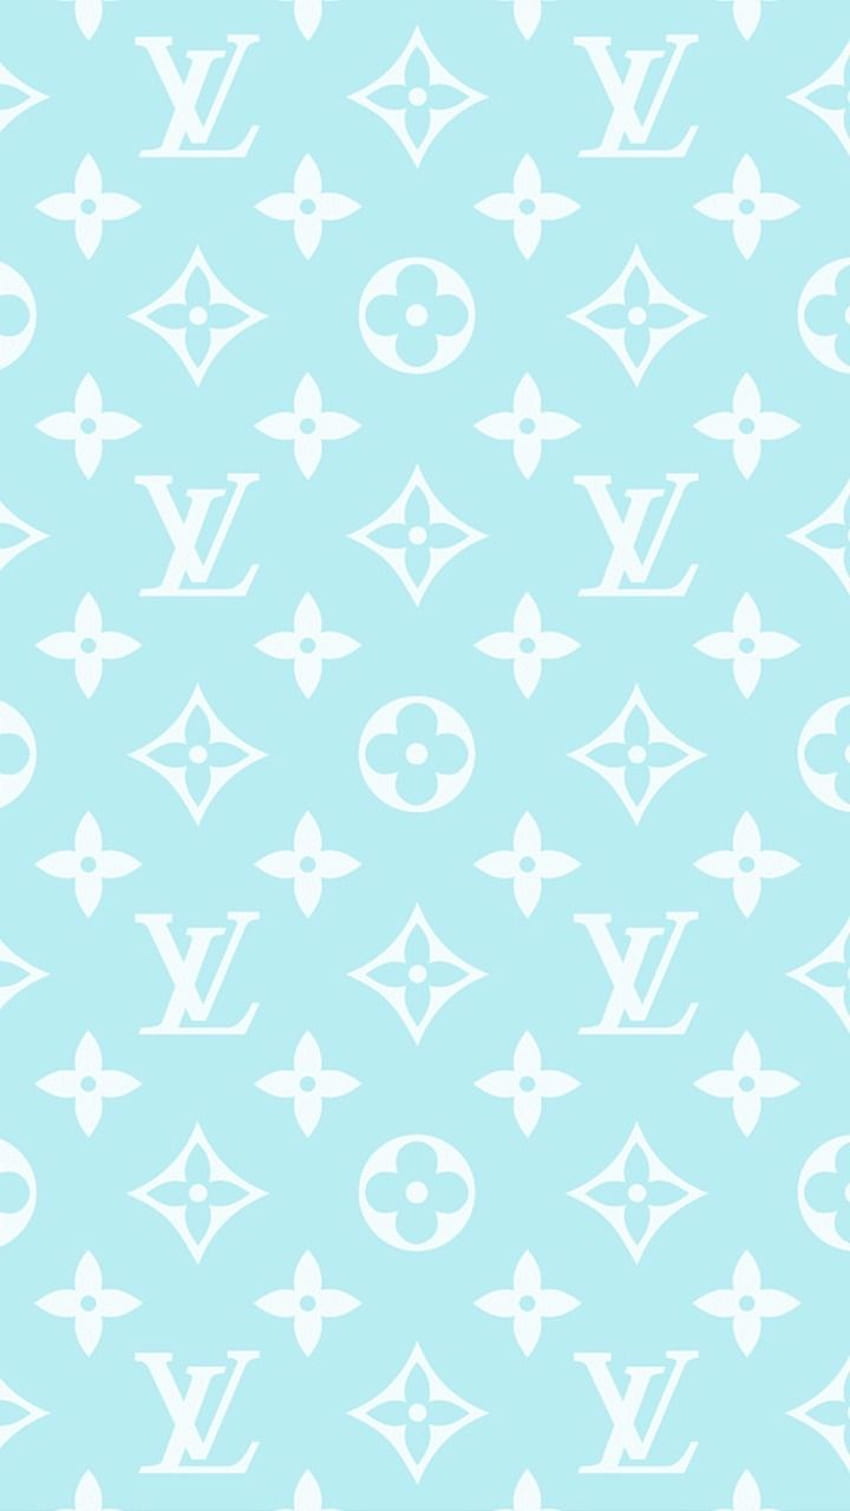 Download wallpapers Louis Vuitton blue logo, 4k, blue neon lights,  creative, blue abstract background, Louis Vuitton logo, fashion brands,  Louis Vuitton for desktop free. Pictures for desktop free